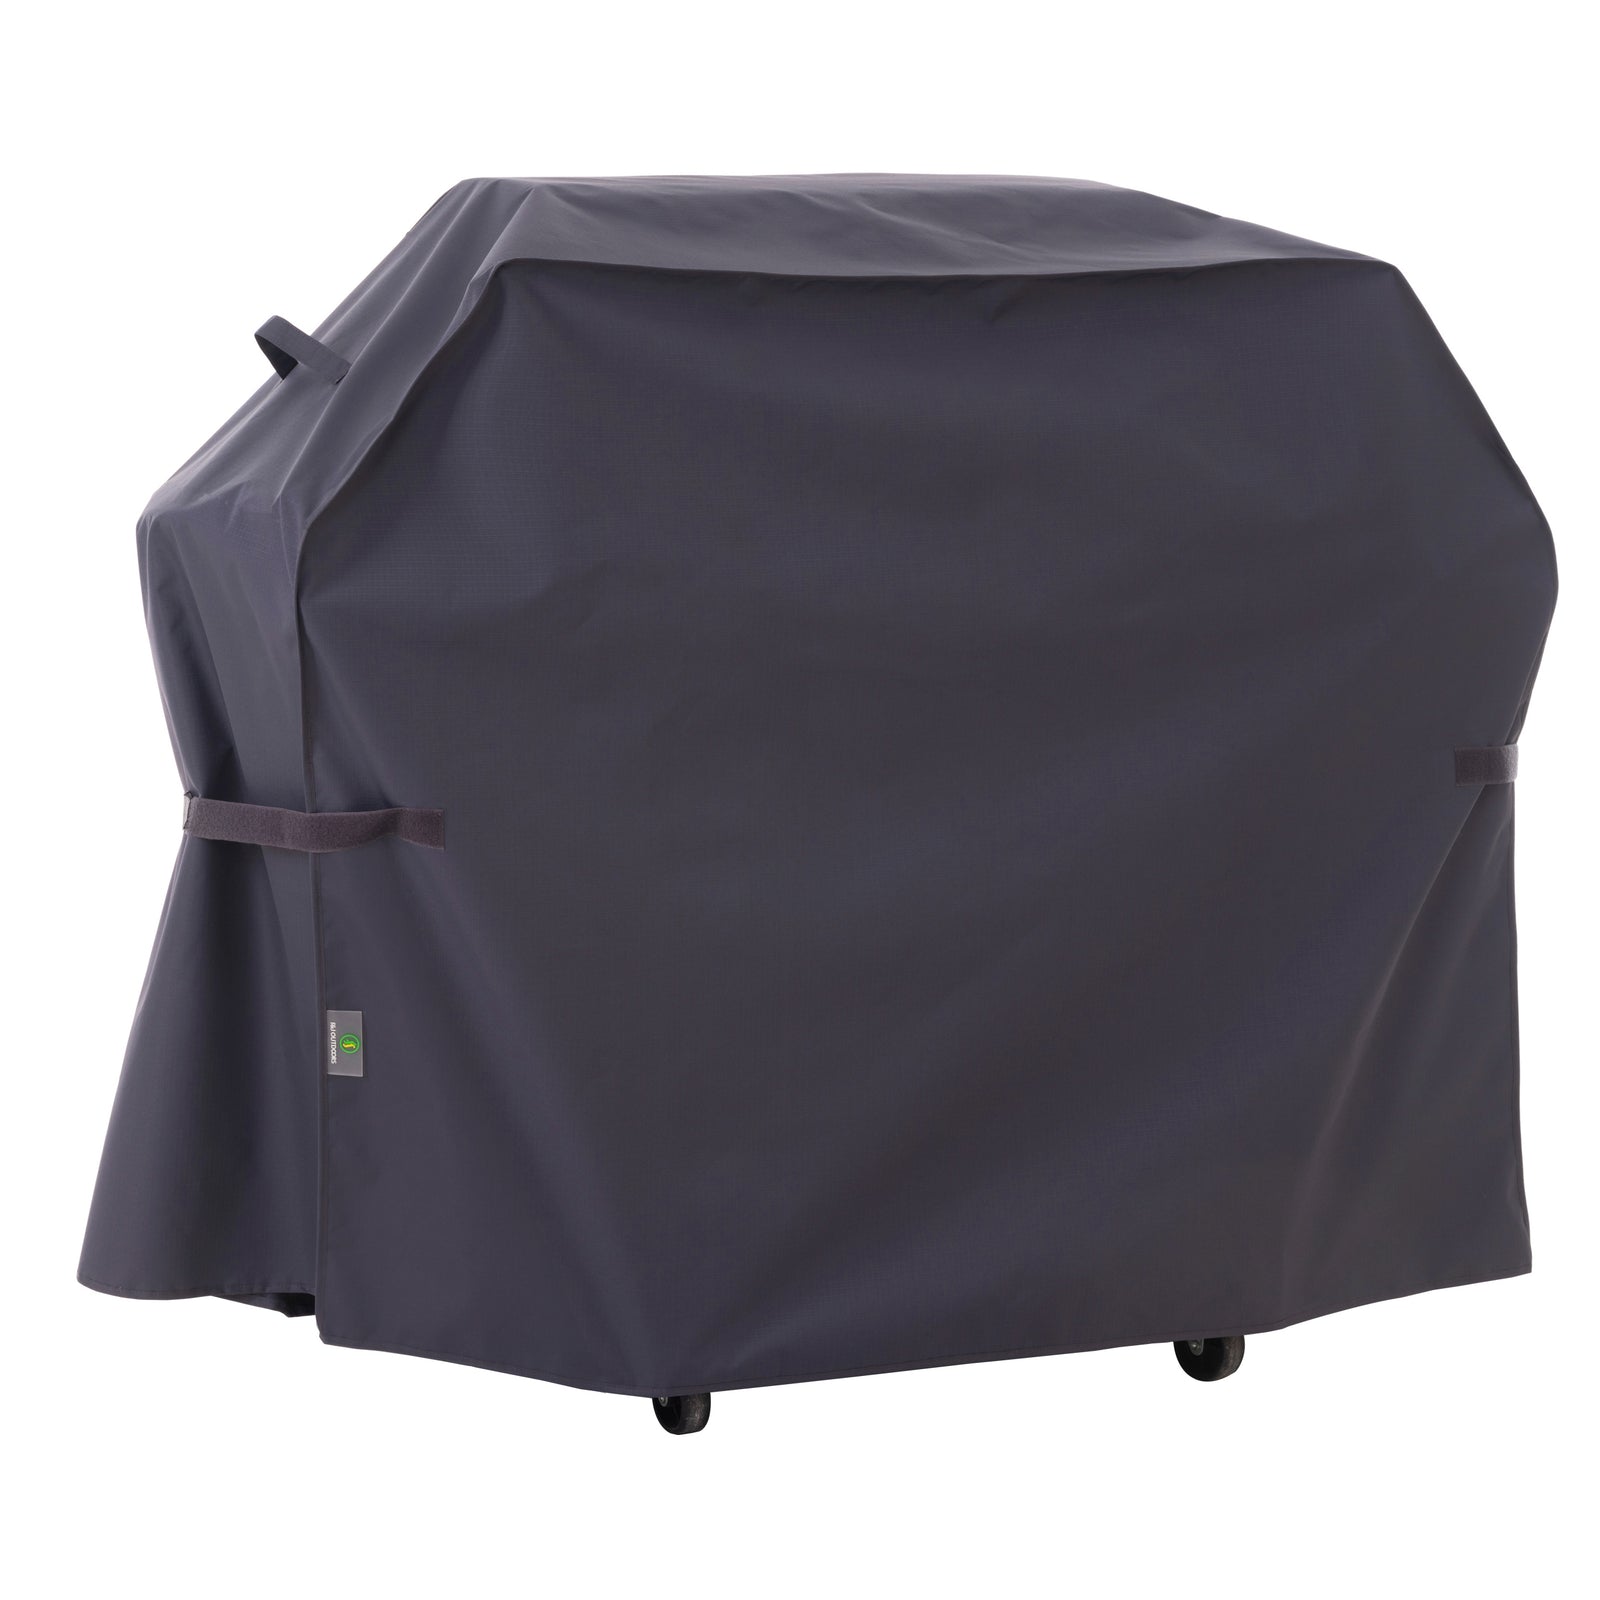 3 Grill Covers To Keep Your BBQ In Perfect Shape: Ultimate Protection Guide